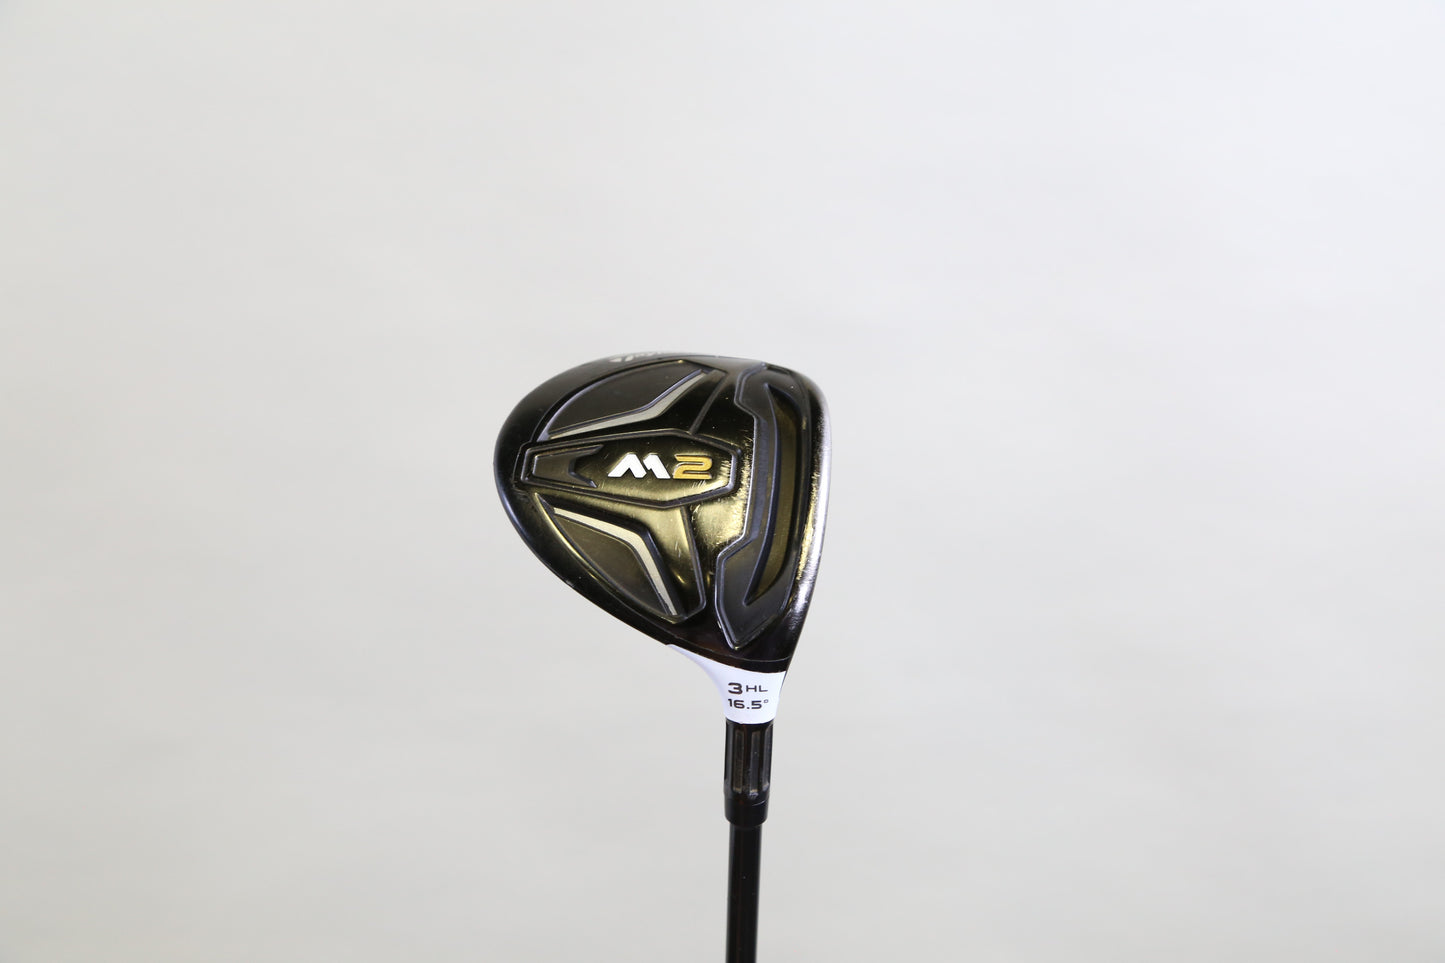 Used TaylorMade M2 3-Wood - Right-Handed - 16.5 Degrees - Seniors Flex